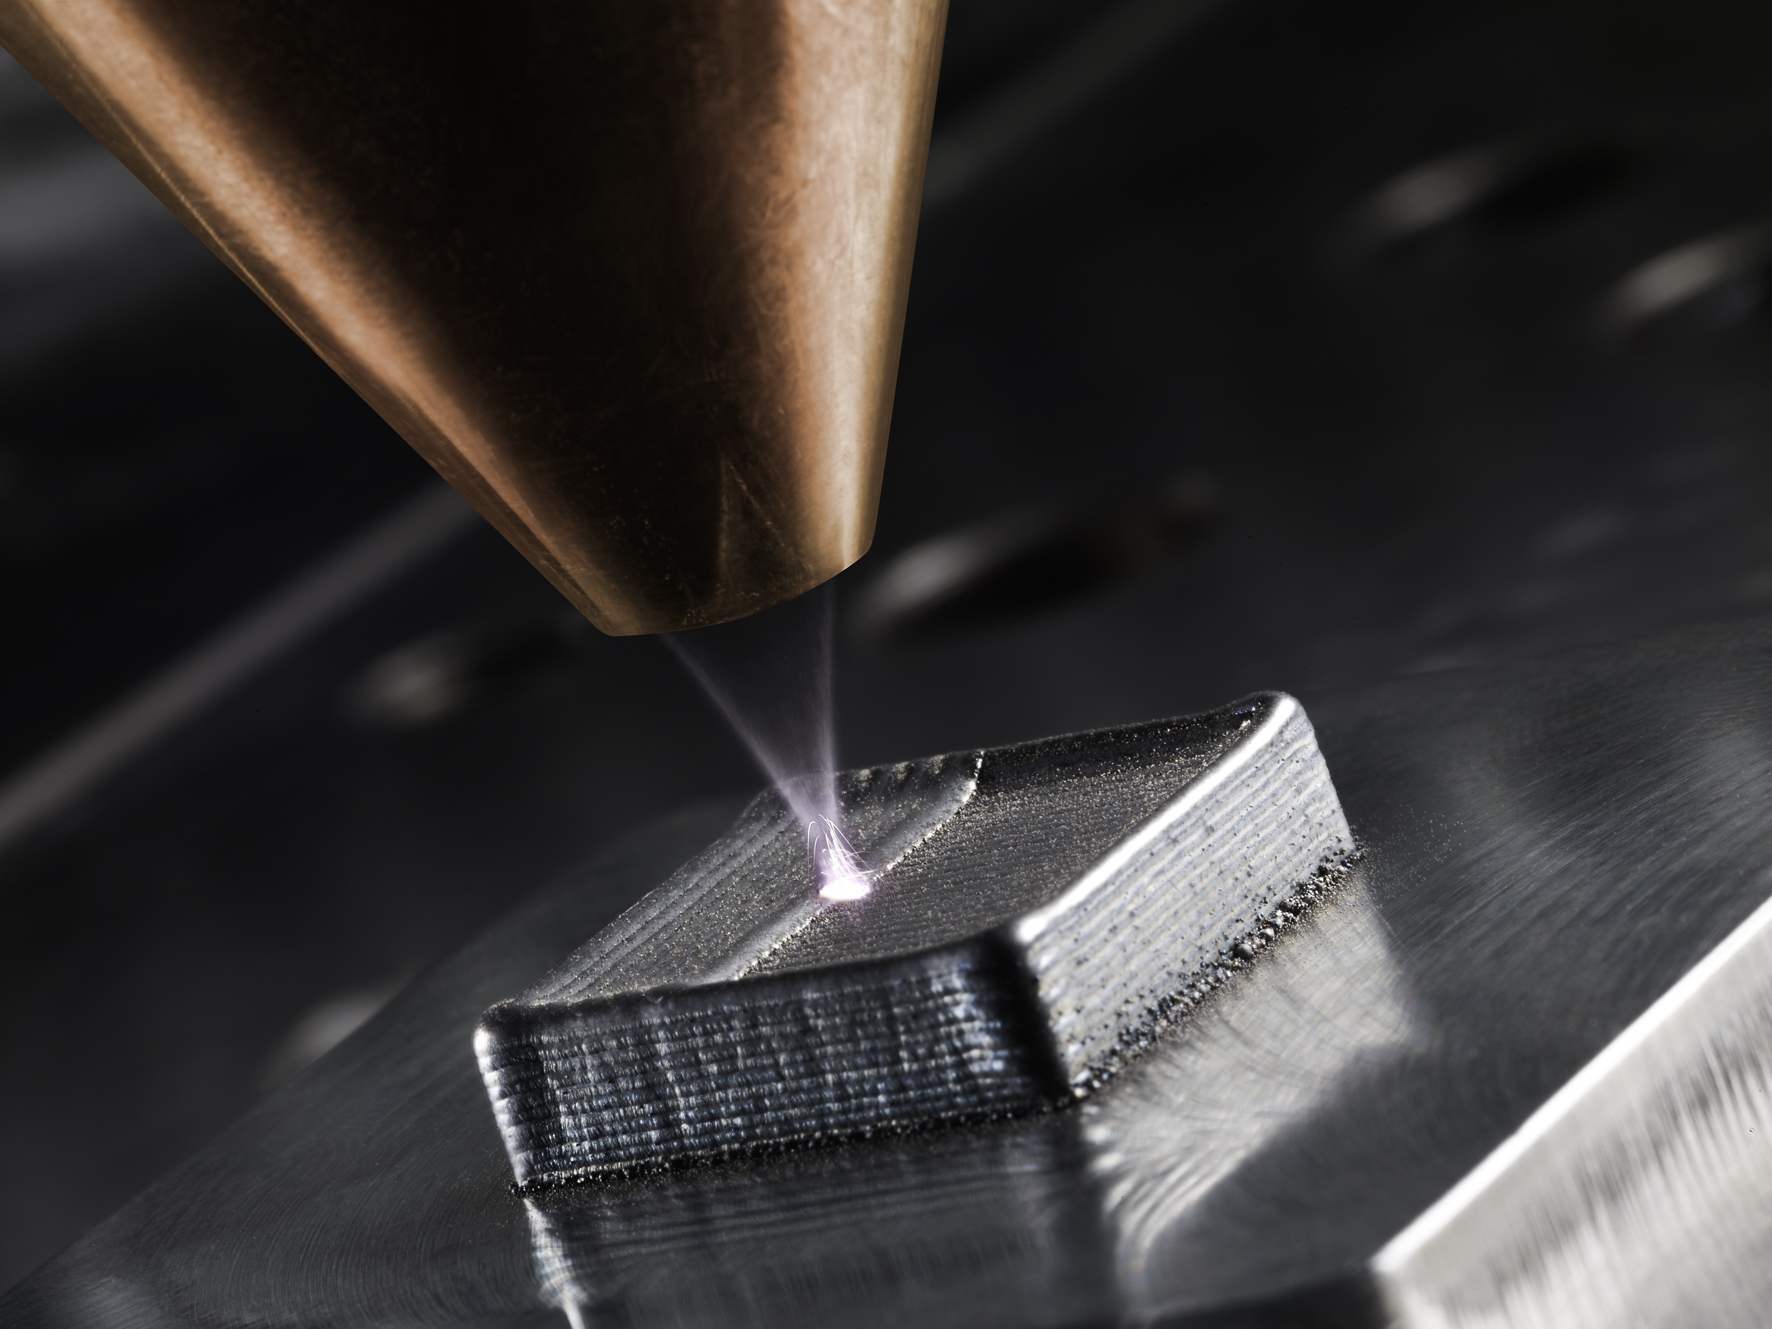 Trumpf plans to introduce new machines for 3D printing metal parts. Photo: Trumpf.